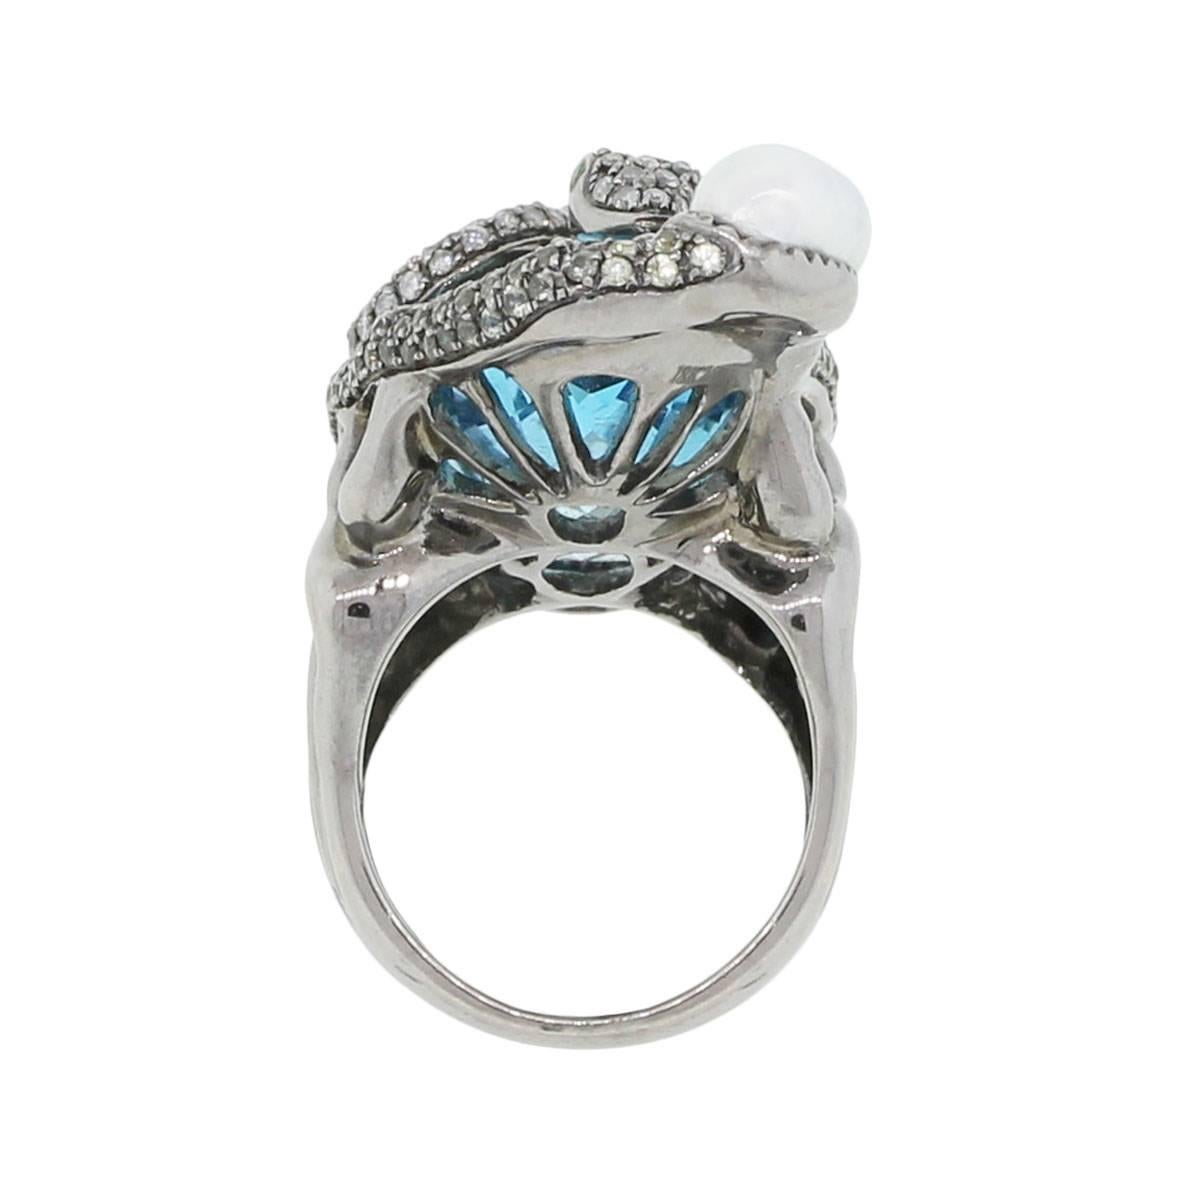 Material: Black rhodium 18k white gold
Diamond Details: Approximately 3ctw of round brilliant diamonds. Diamonds are G/H in color and SI in clarity
Gemstone Details: Oval shape aquamarine stone measuring approximately 1.50″ x 0.75″. Round shape